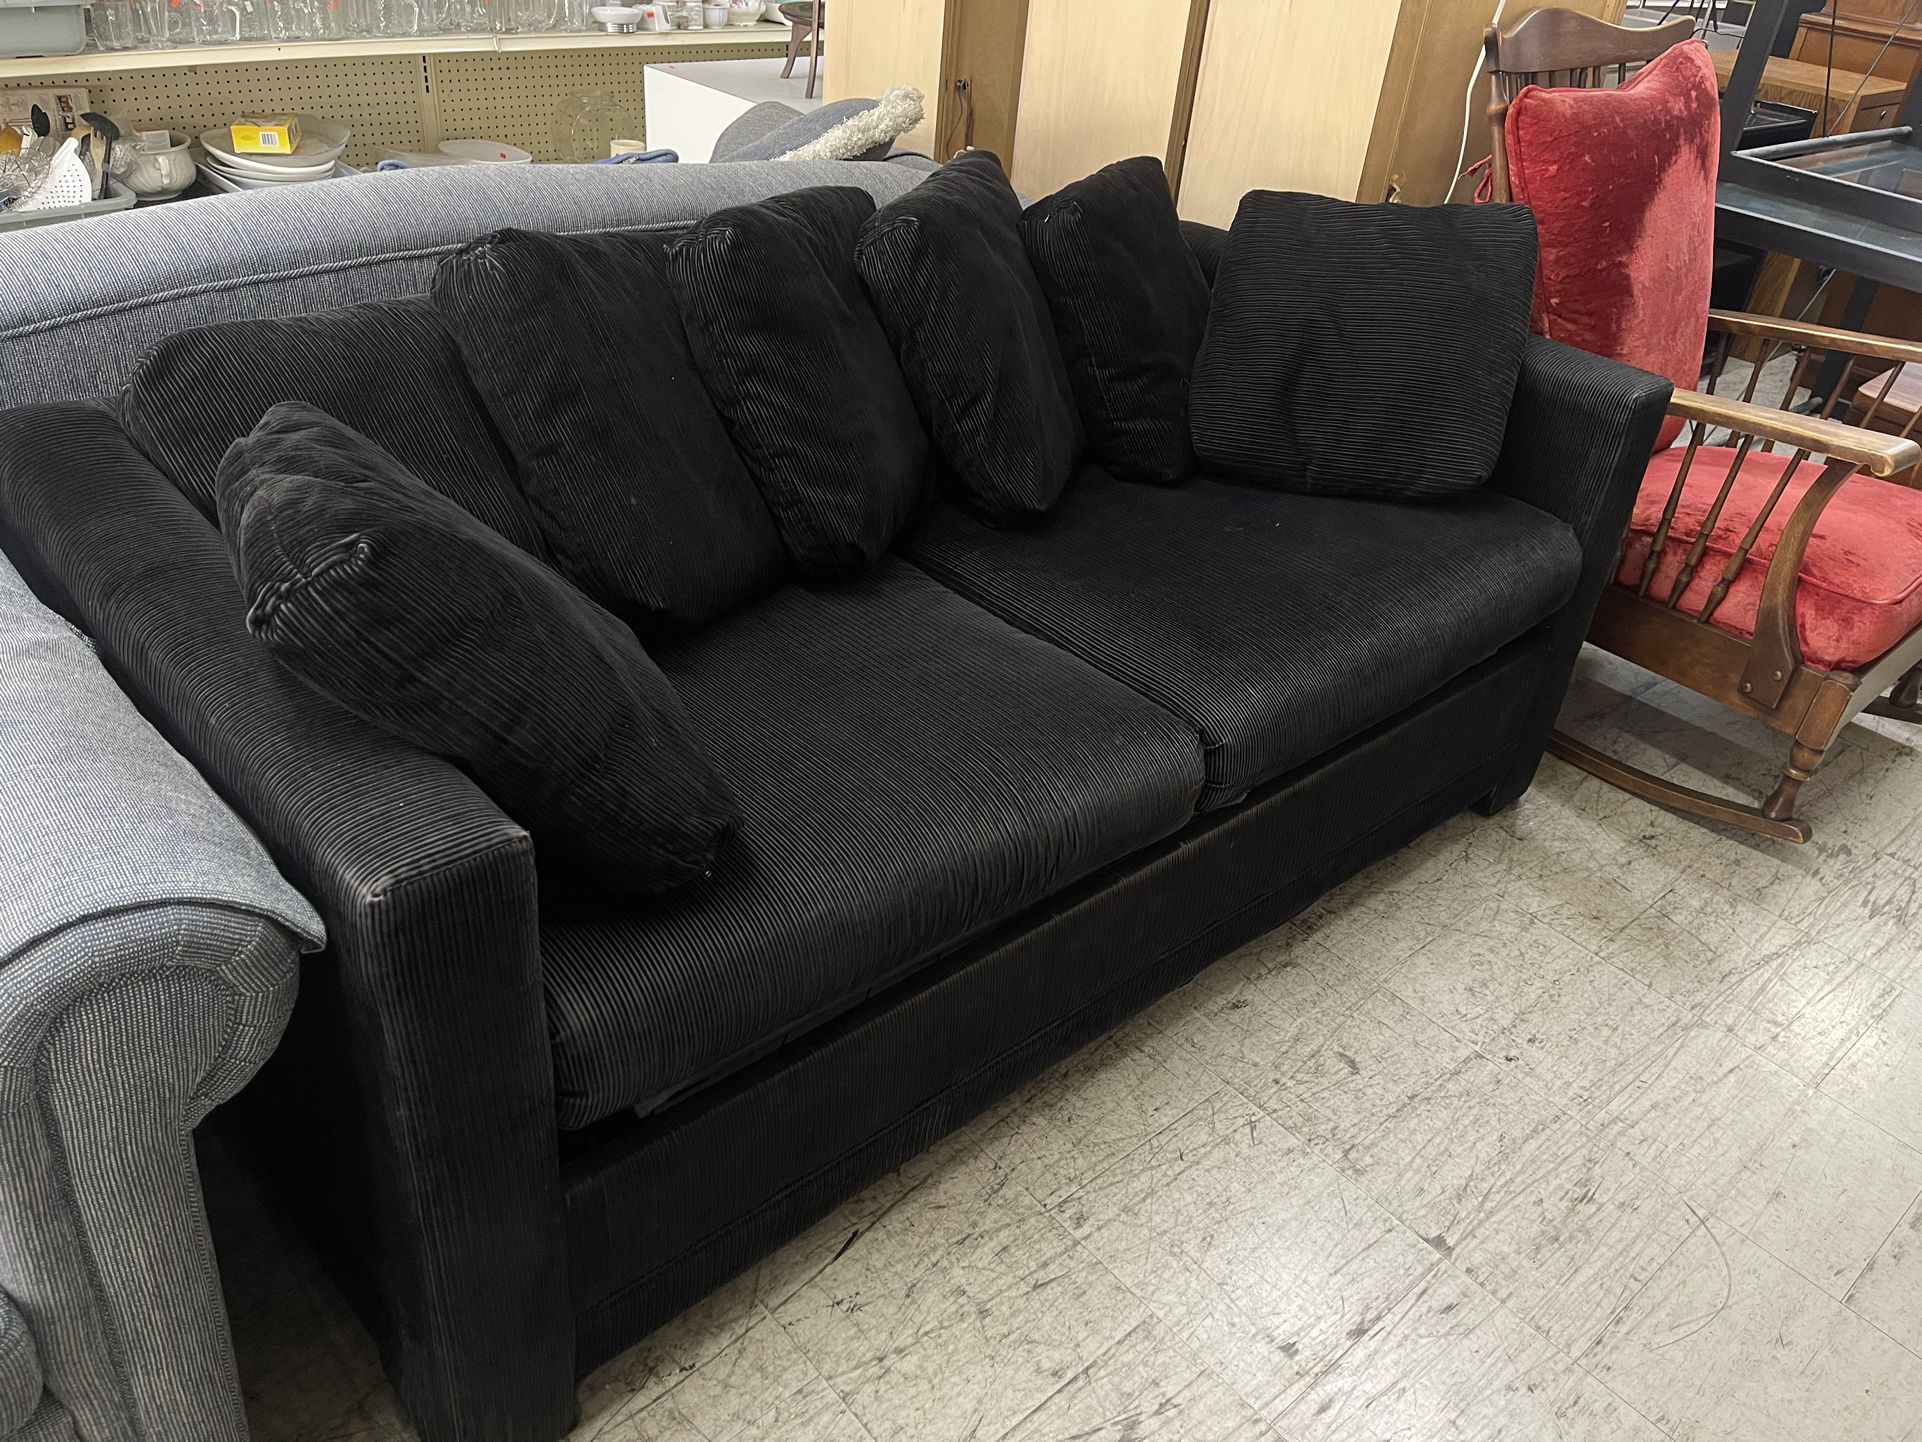 BEAUTIFUL SENIOR OWNED BLACK CORDUROY SOFA BED COUCH VINTAGE CLEA SPOTLESS FROM WESTWOOD